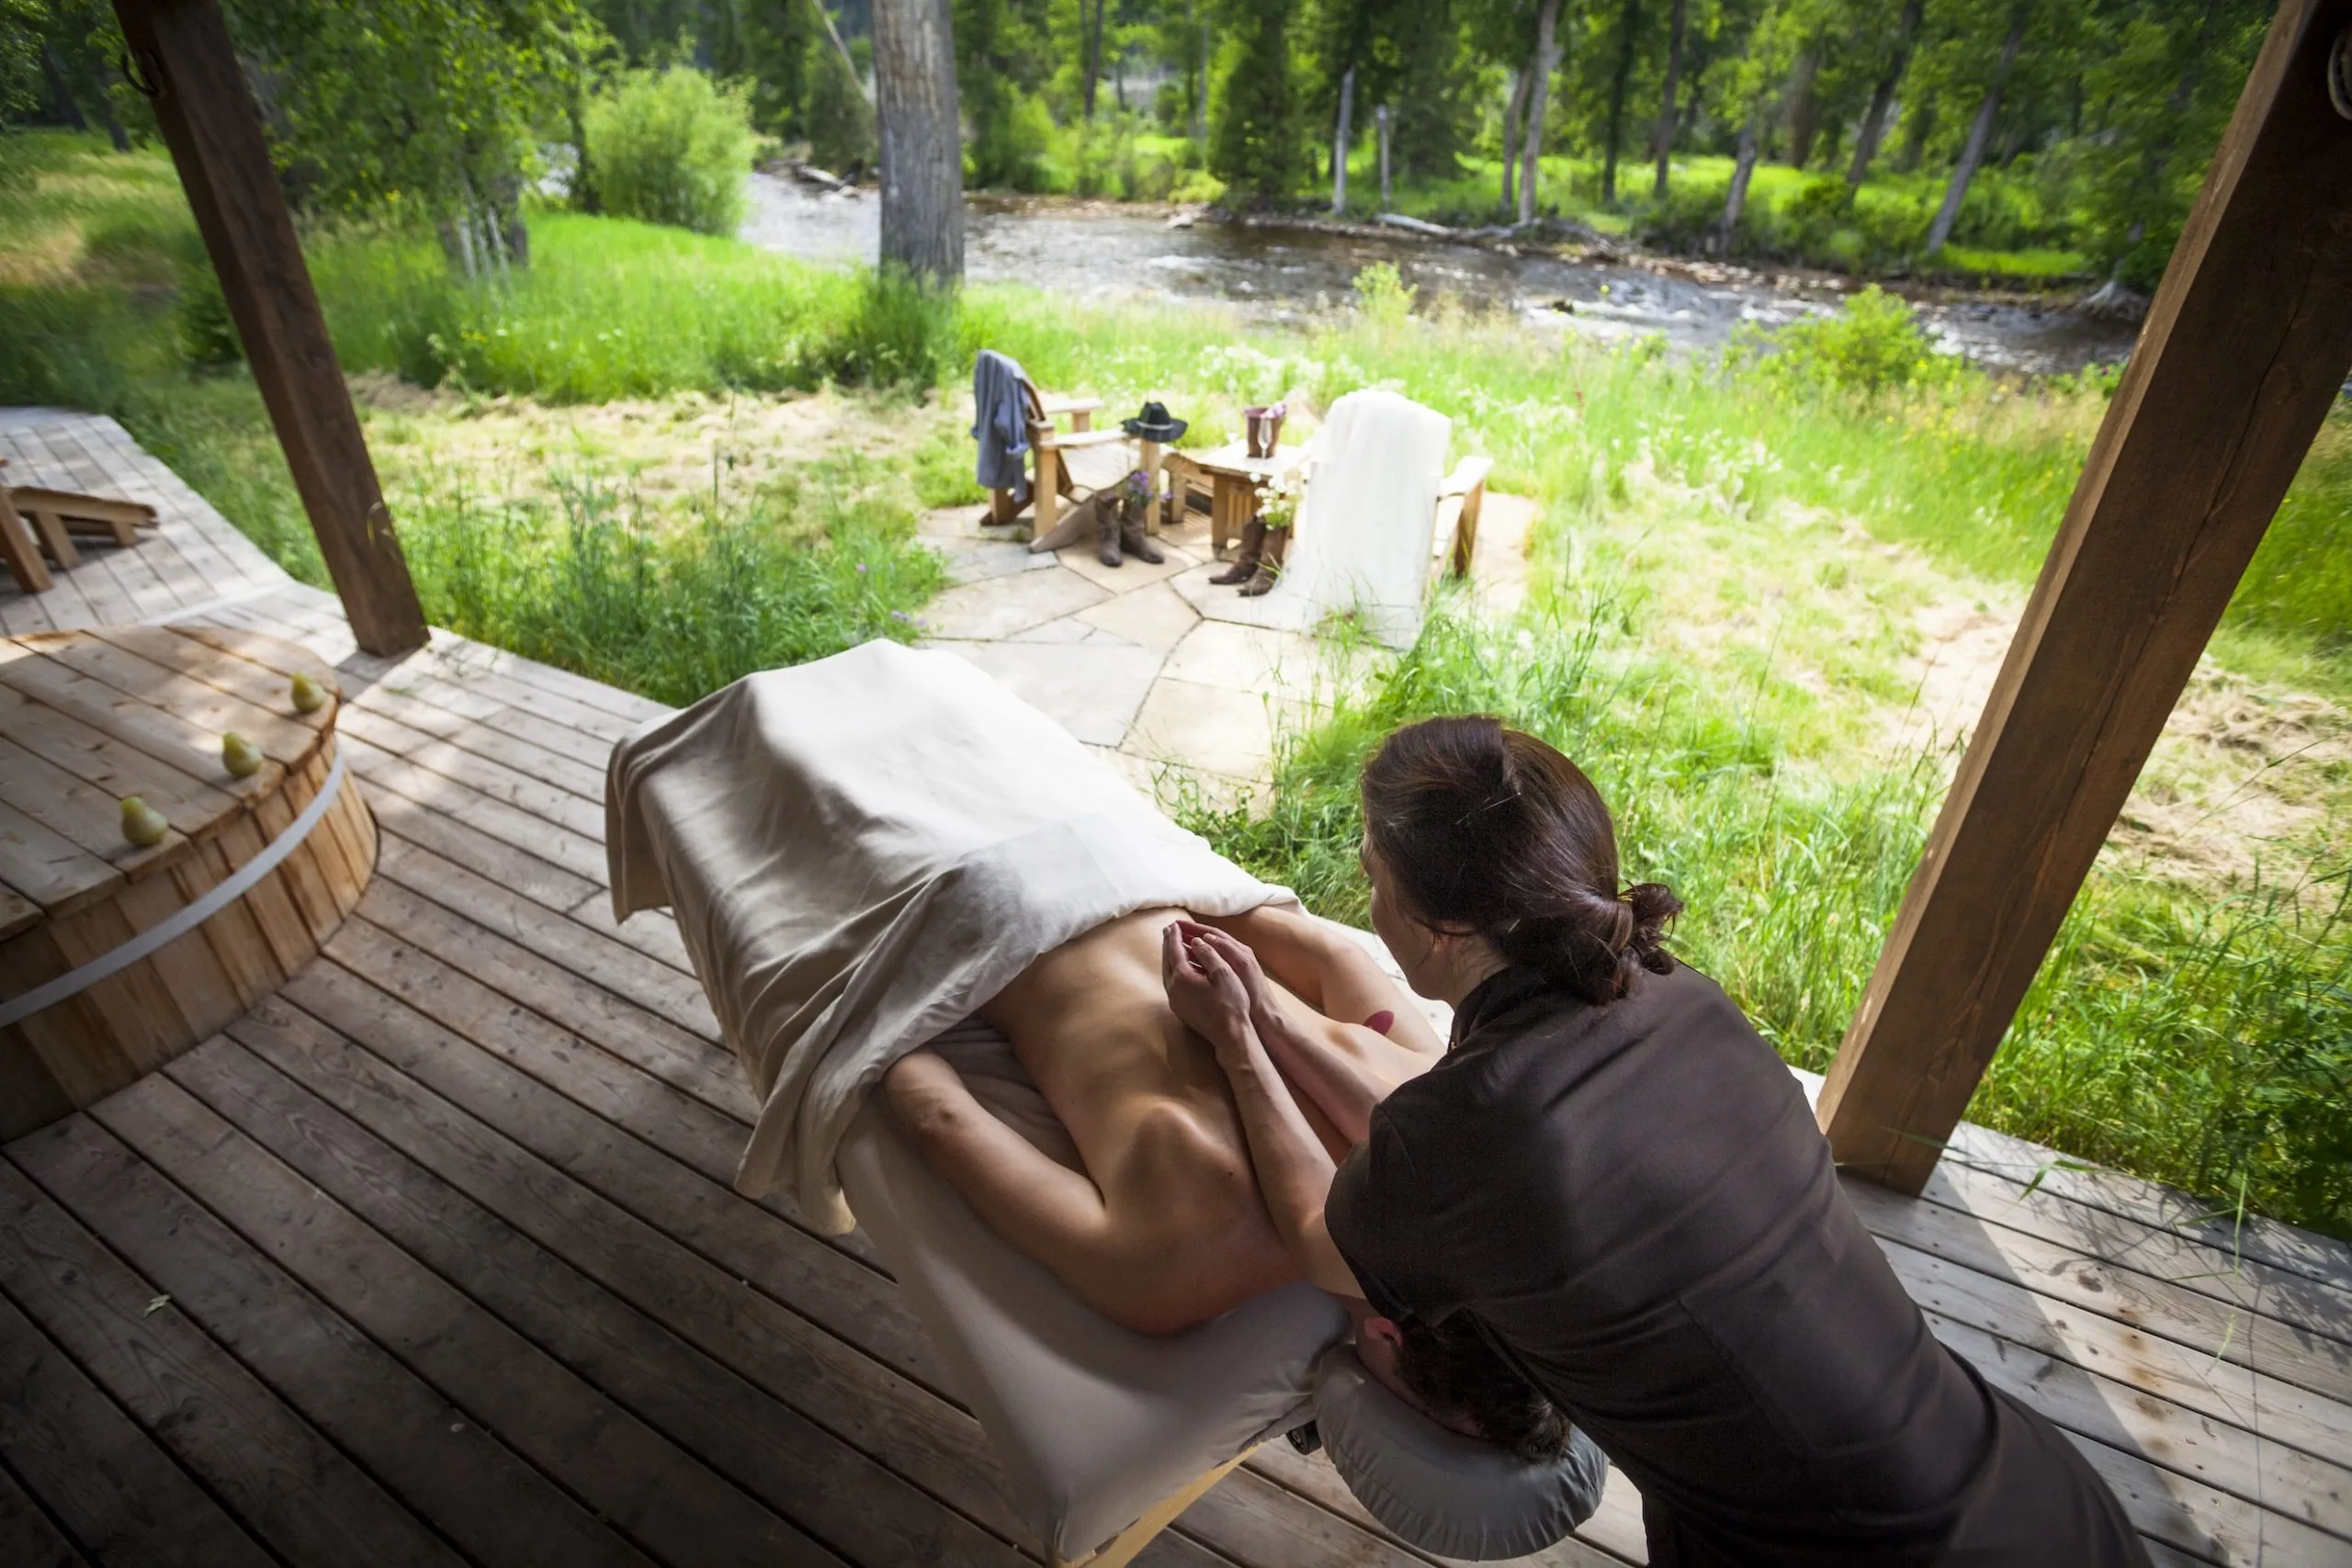 A masseuse massaging a client on a massage table located on a scenic porch facing a river